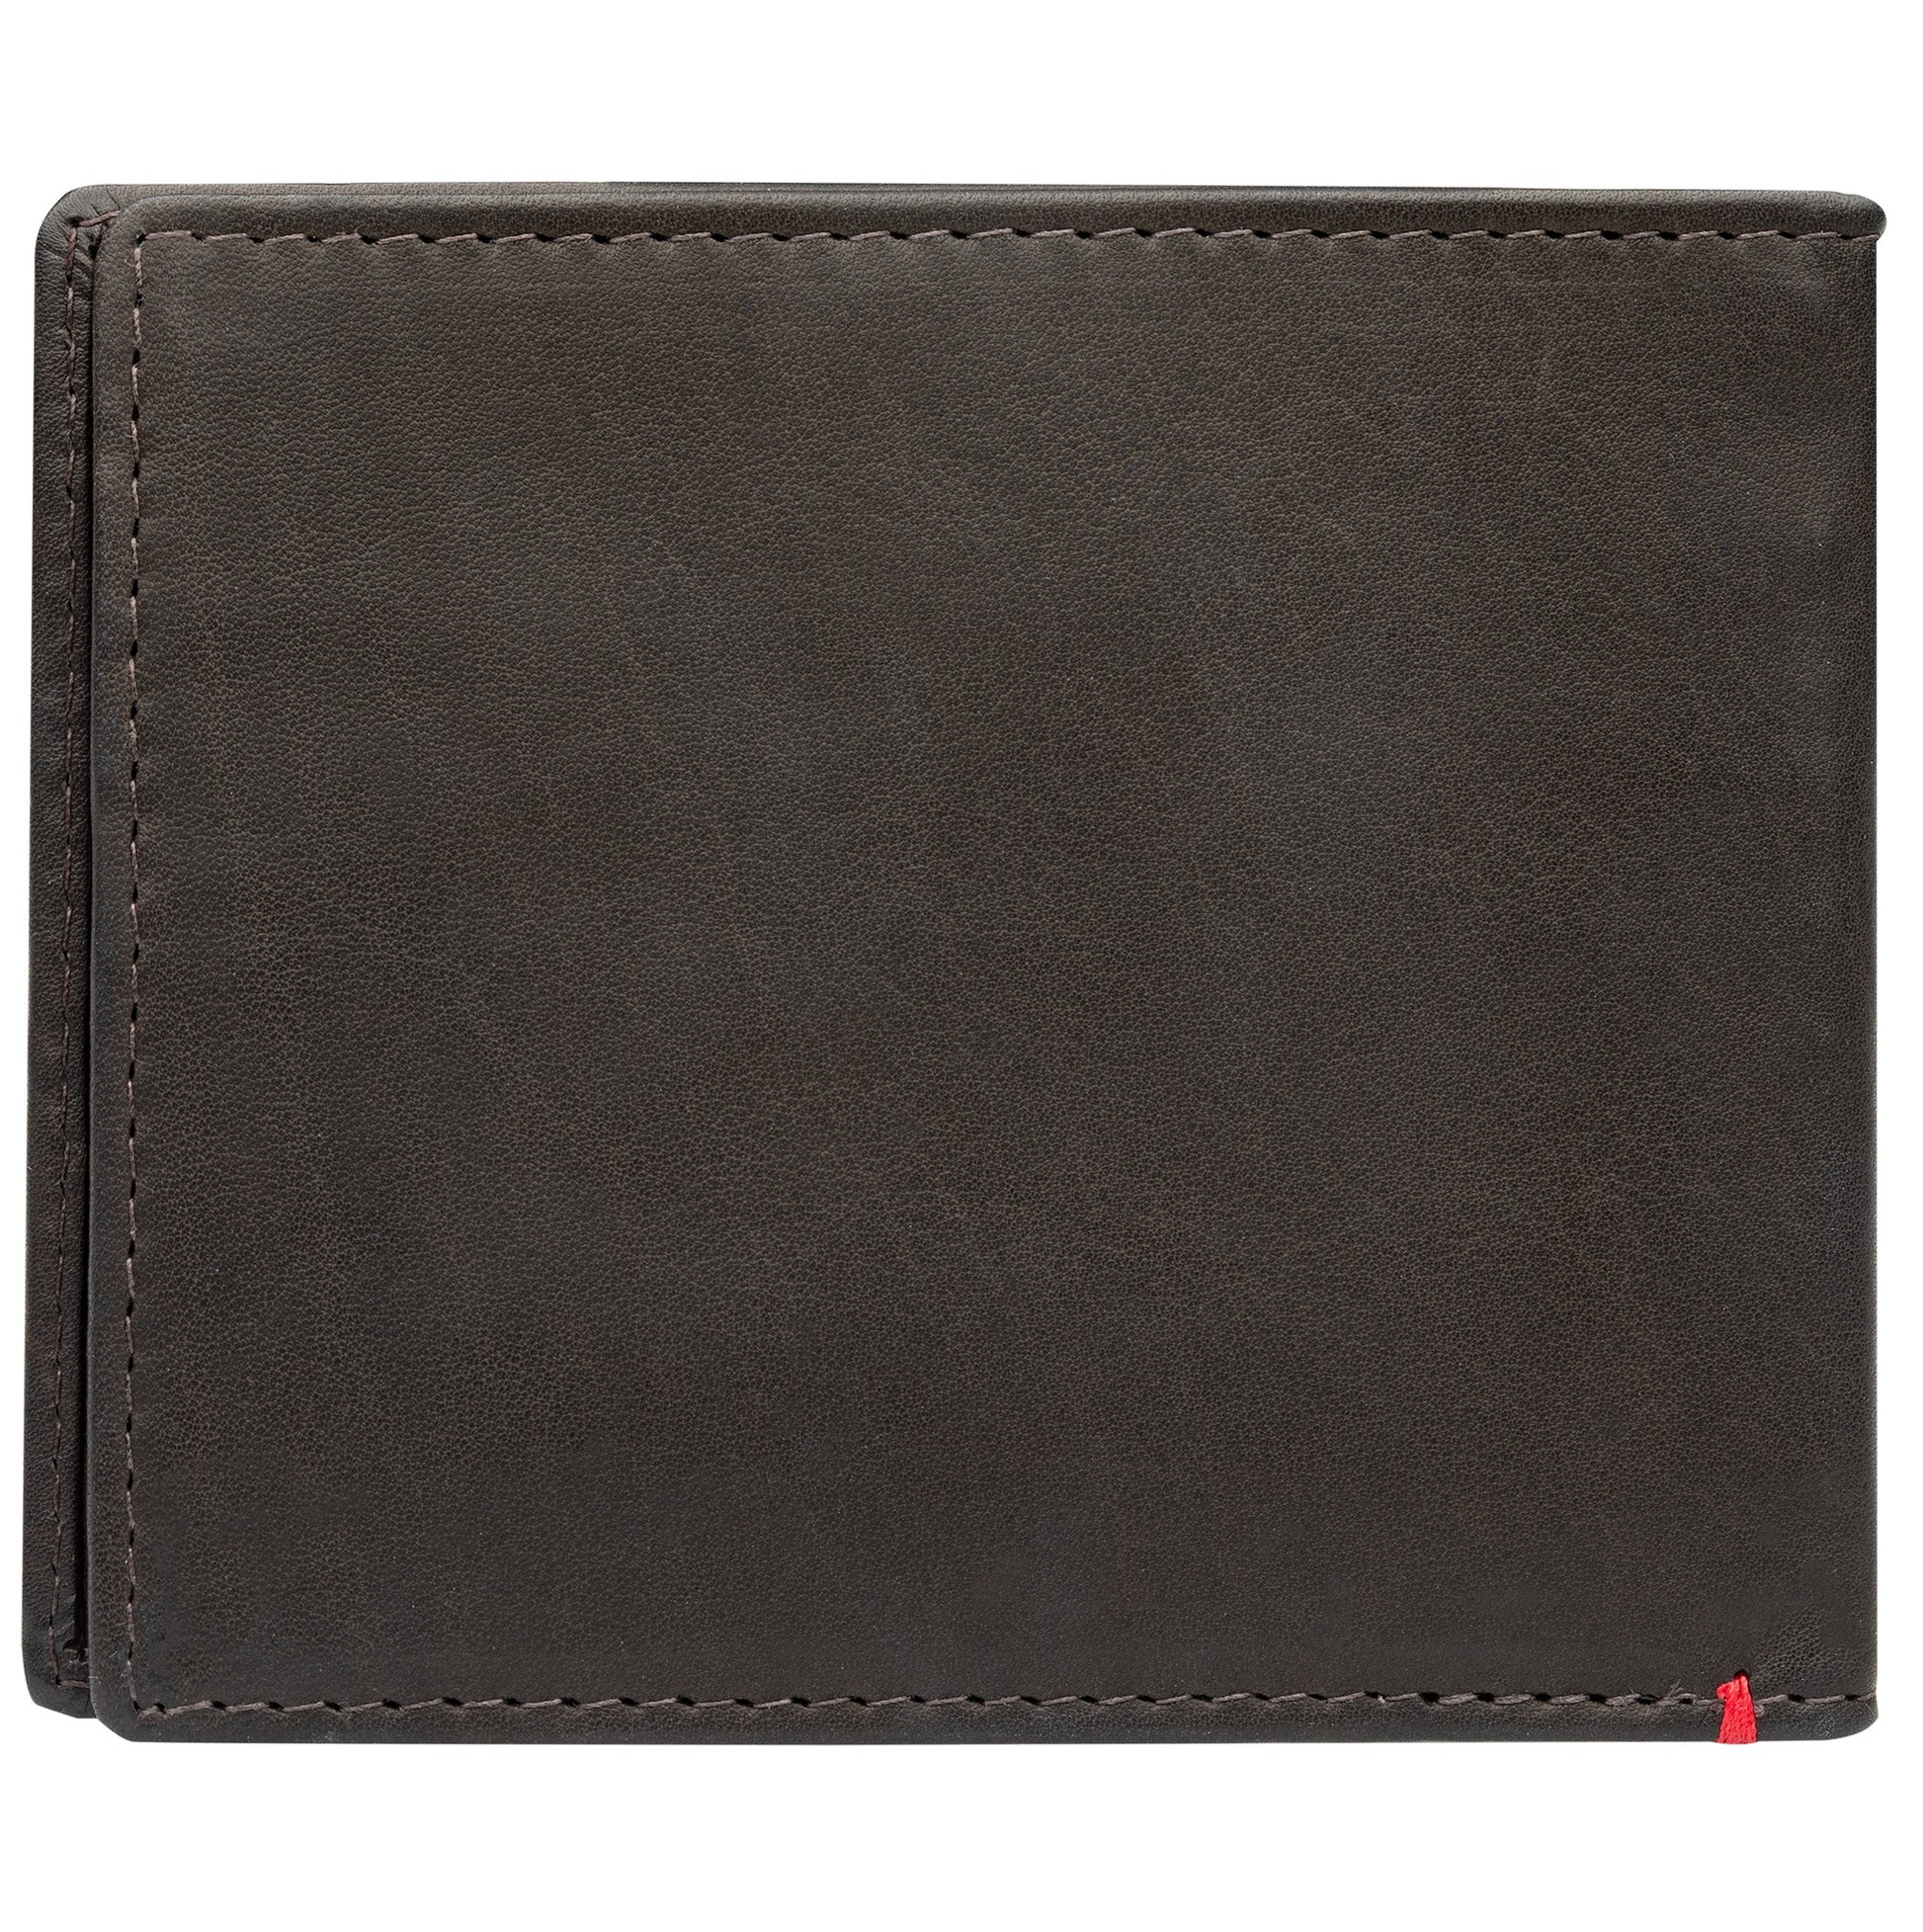 Back of mocha leather Wallet With Bass Metal Plate - ID Window